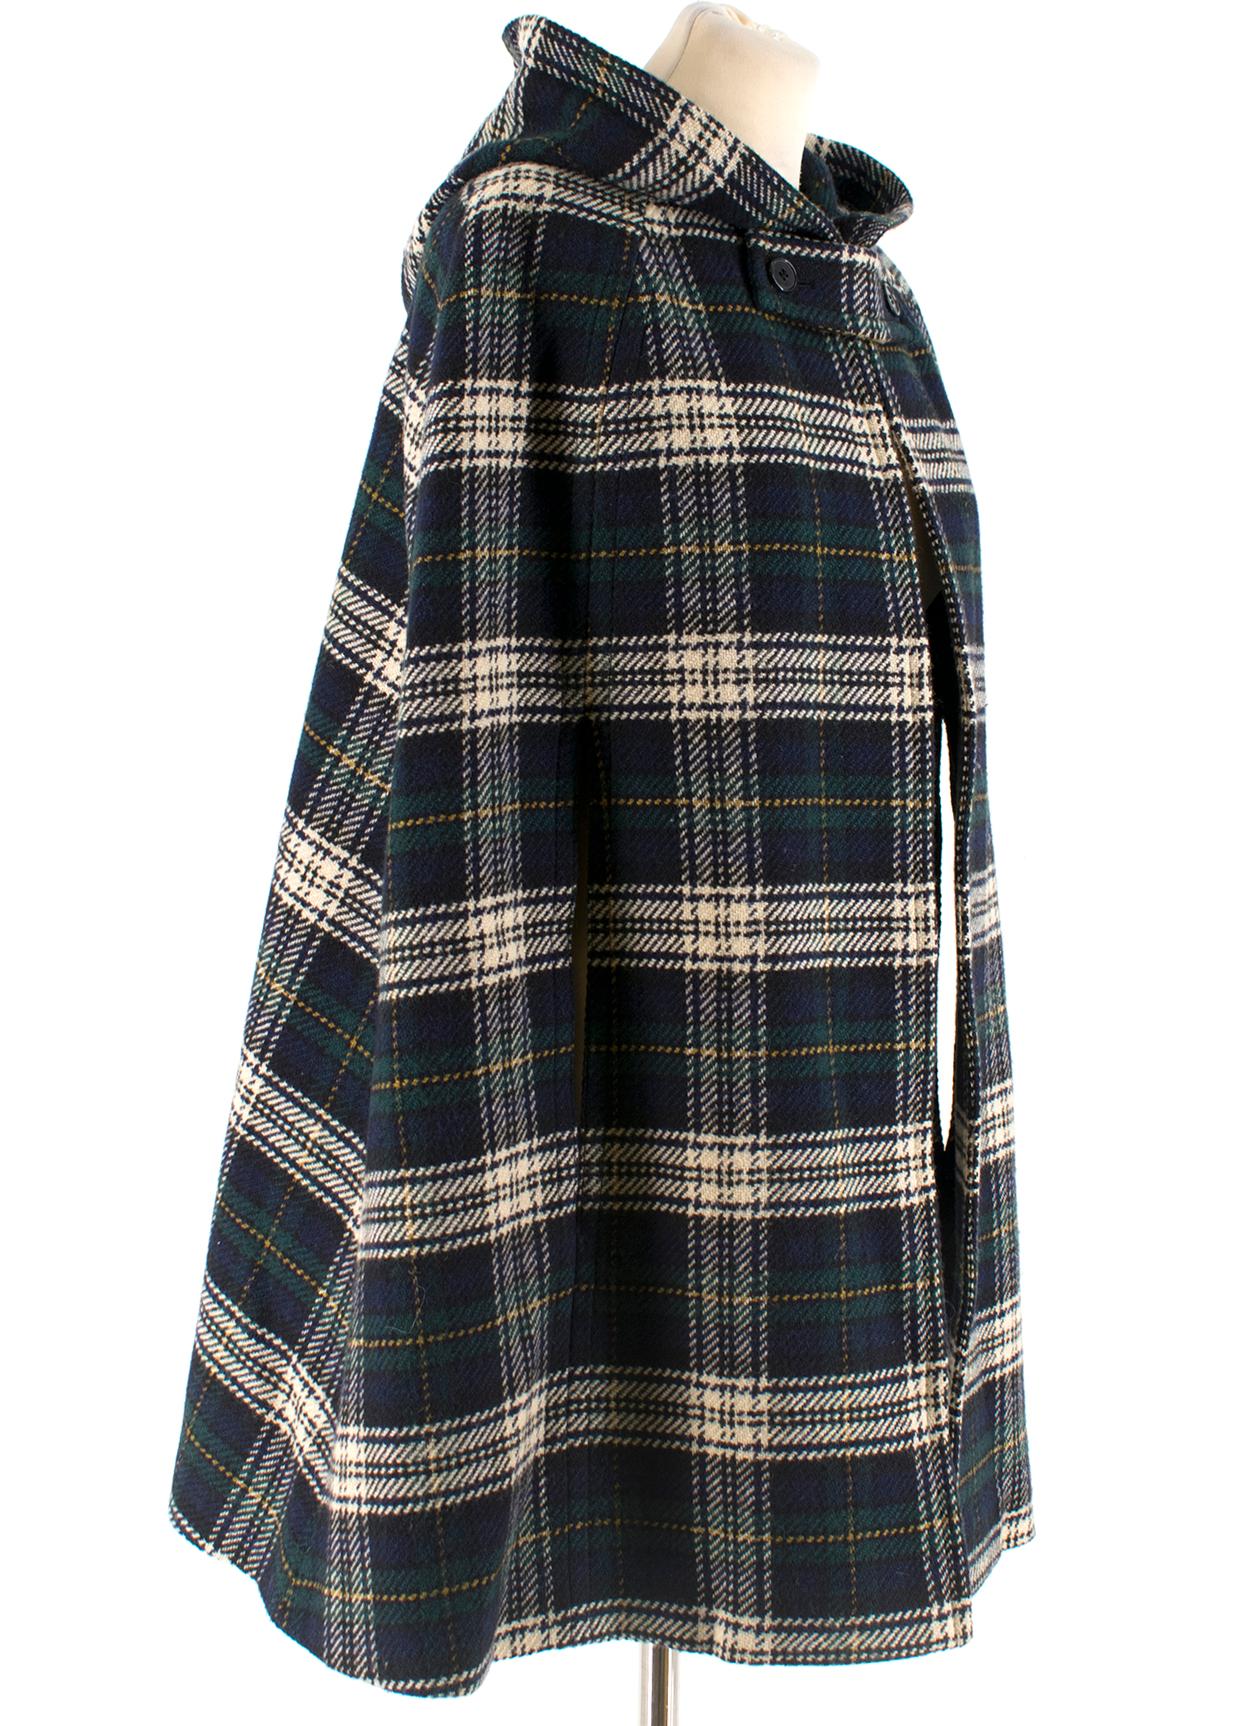 Saint Laurent Hooded Plaid Wool Cape

- Fastens at neck 
- Hand slits at sides
- Attached hood in back
- Thick, warm material

Please note, these items are pre-owned and may show signs of being stored even when unworn and unused. This is reflected